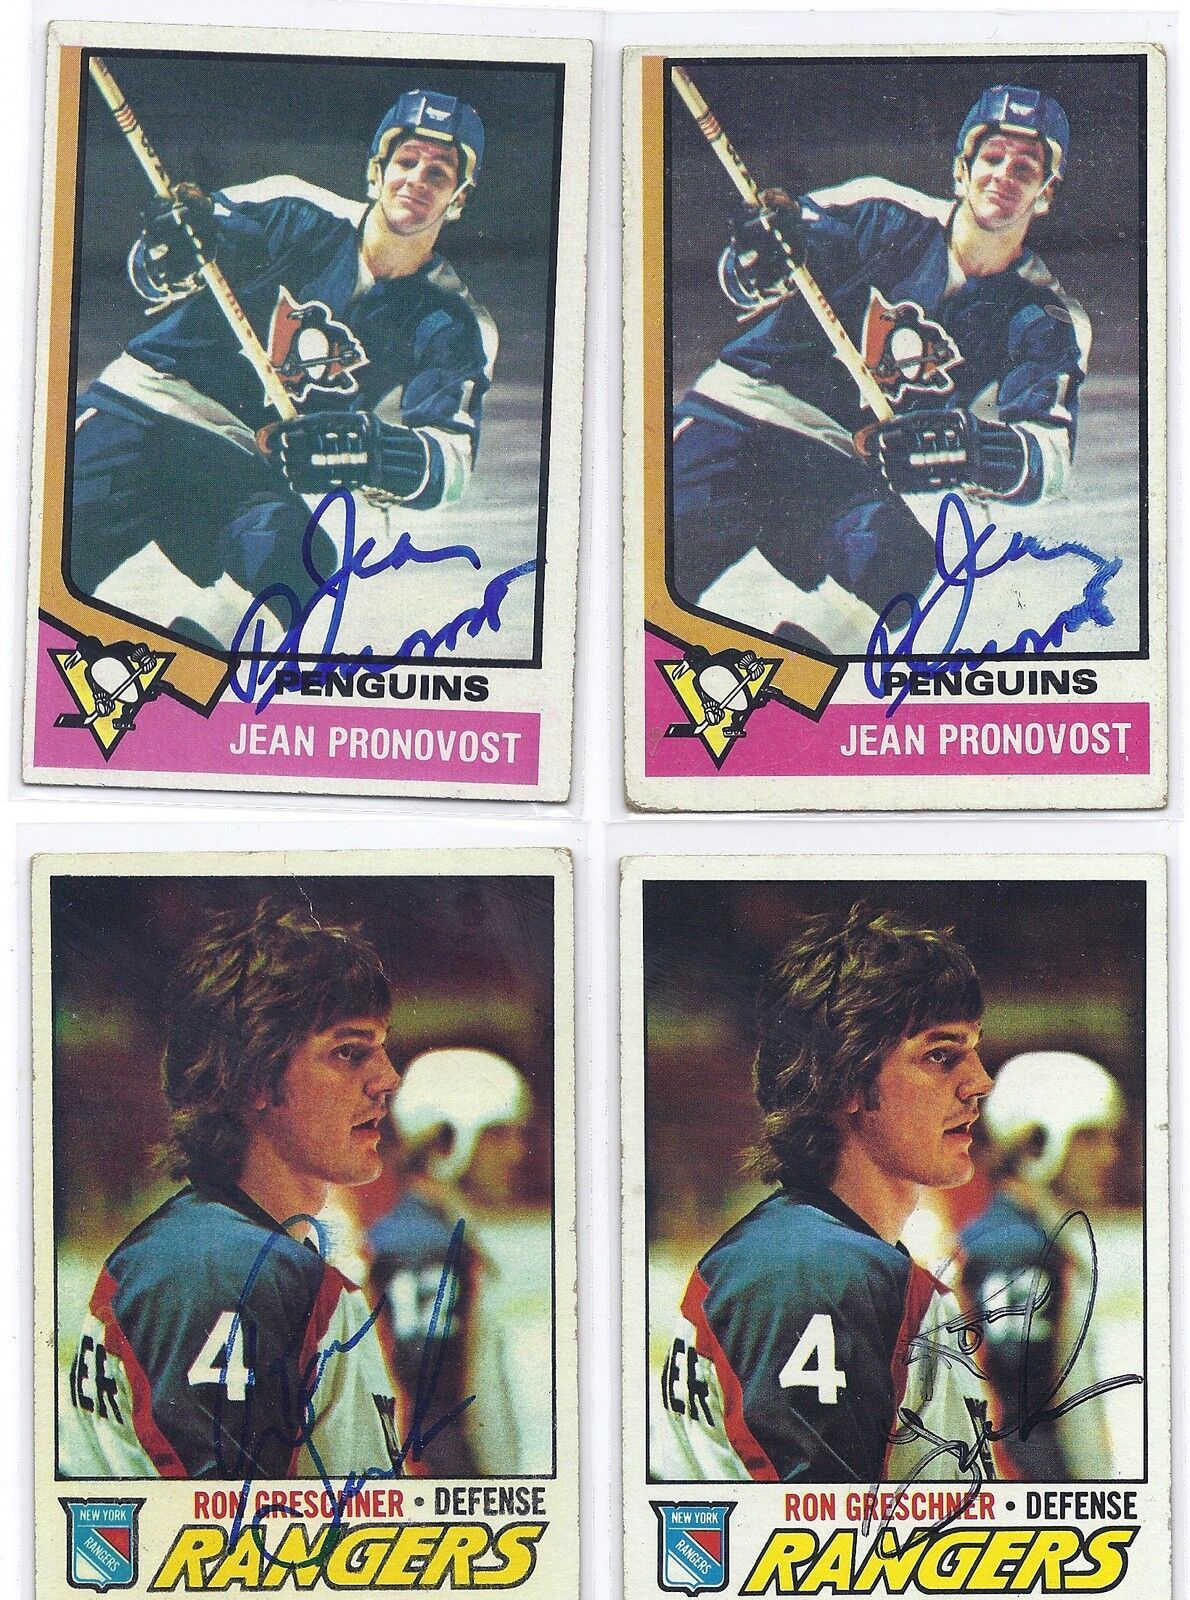 1975-76 Topps #110 Jean Pronovost Pittsburgh Penguins Autographed Hockey Card